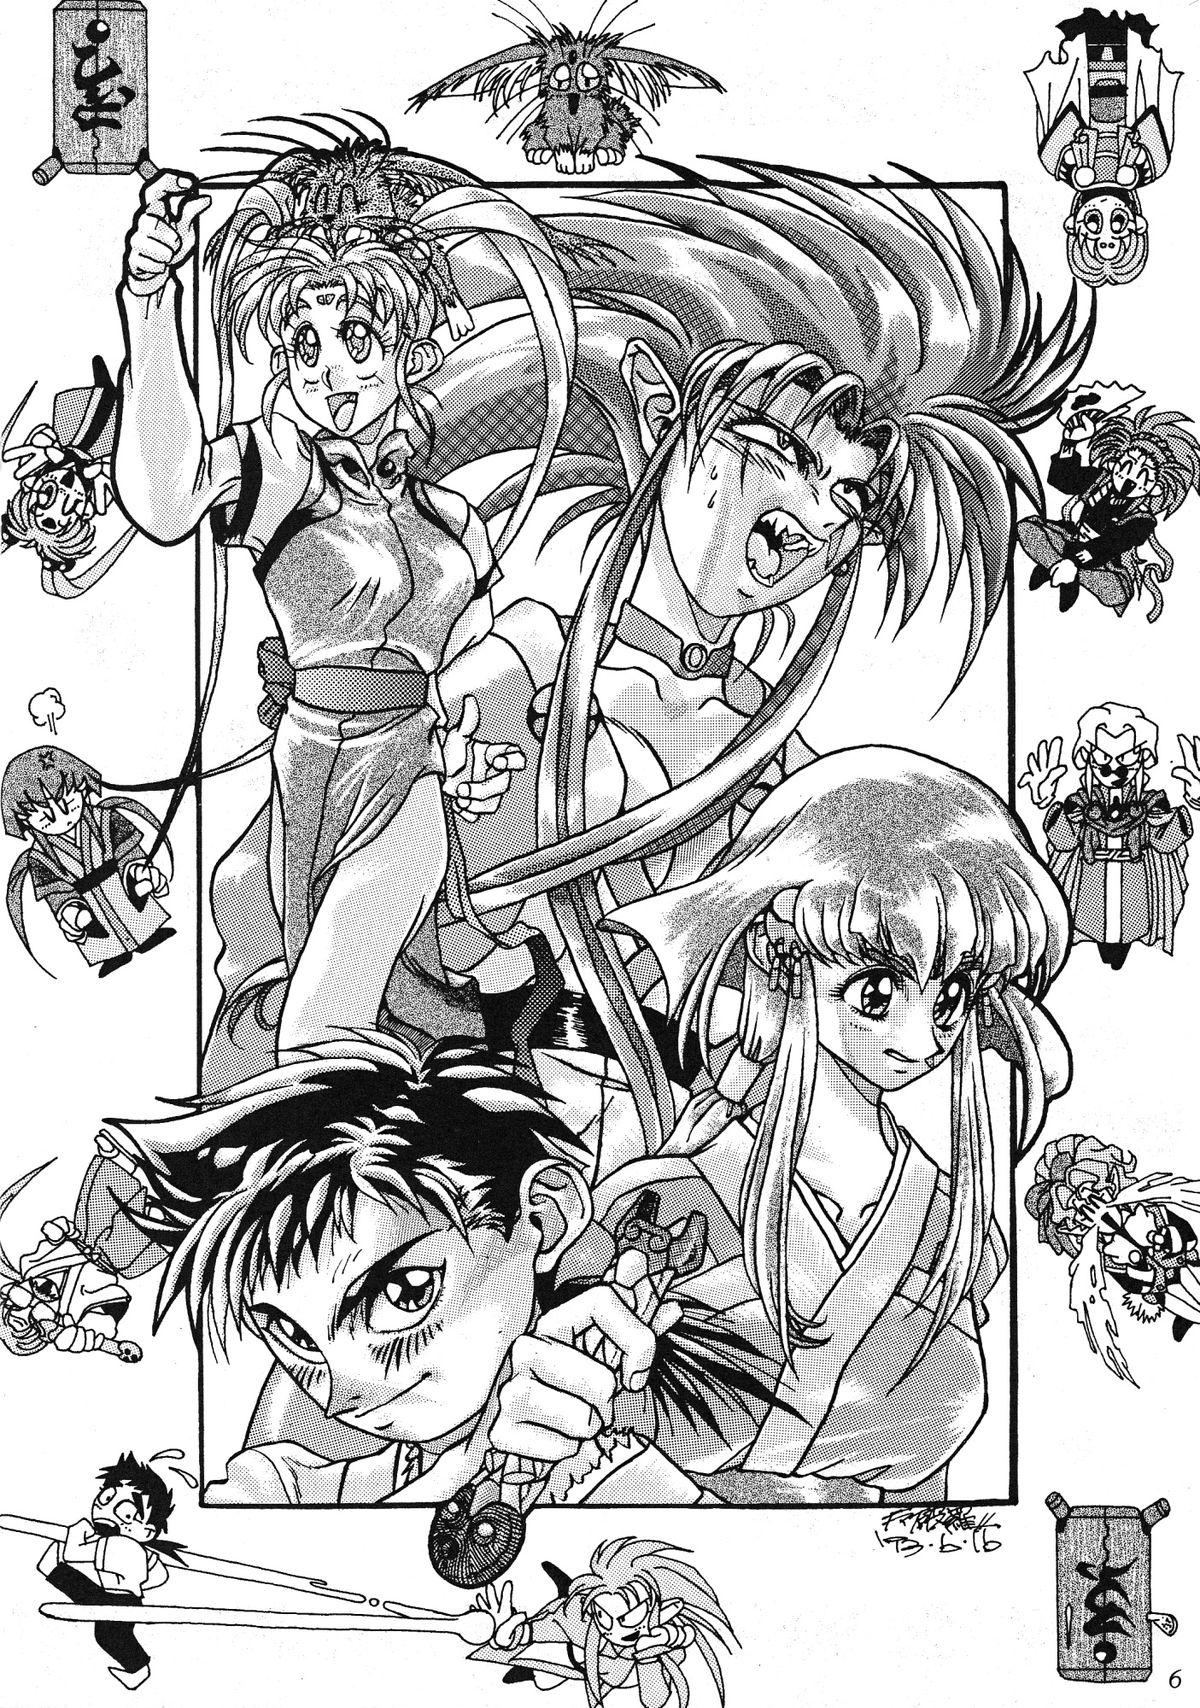 Butt Sex Milky Syndrome EX 2 - Sailor moon Tenchi muyo Pretty sammy Ghost sweeper mikami Ng knight lamune and 40 Babe - Page 8